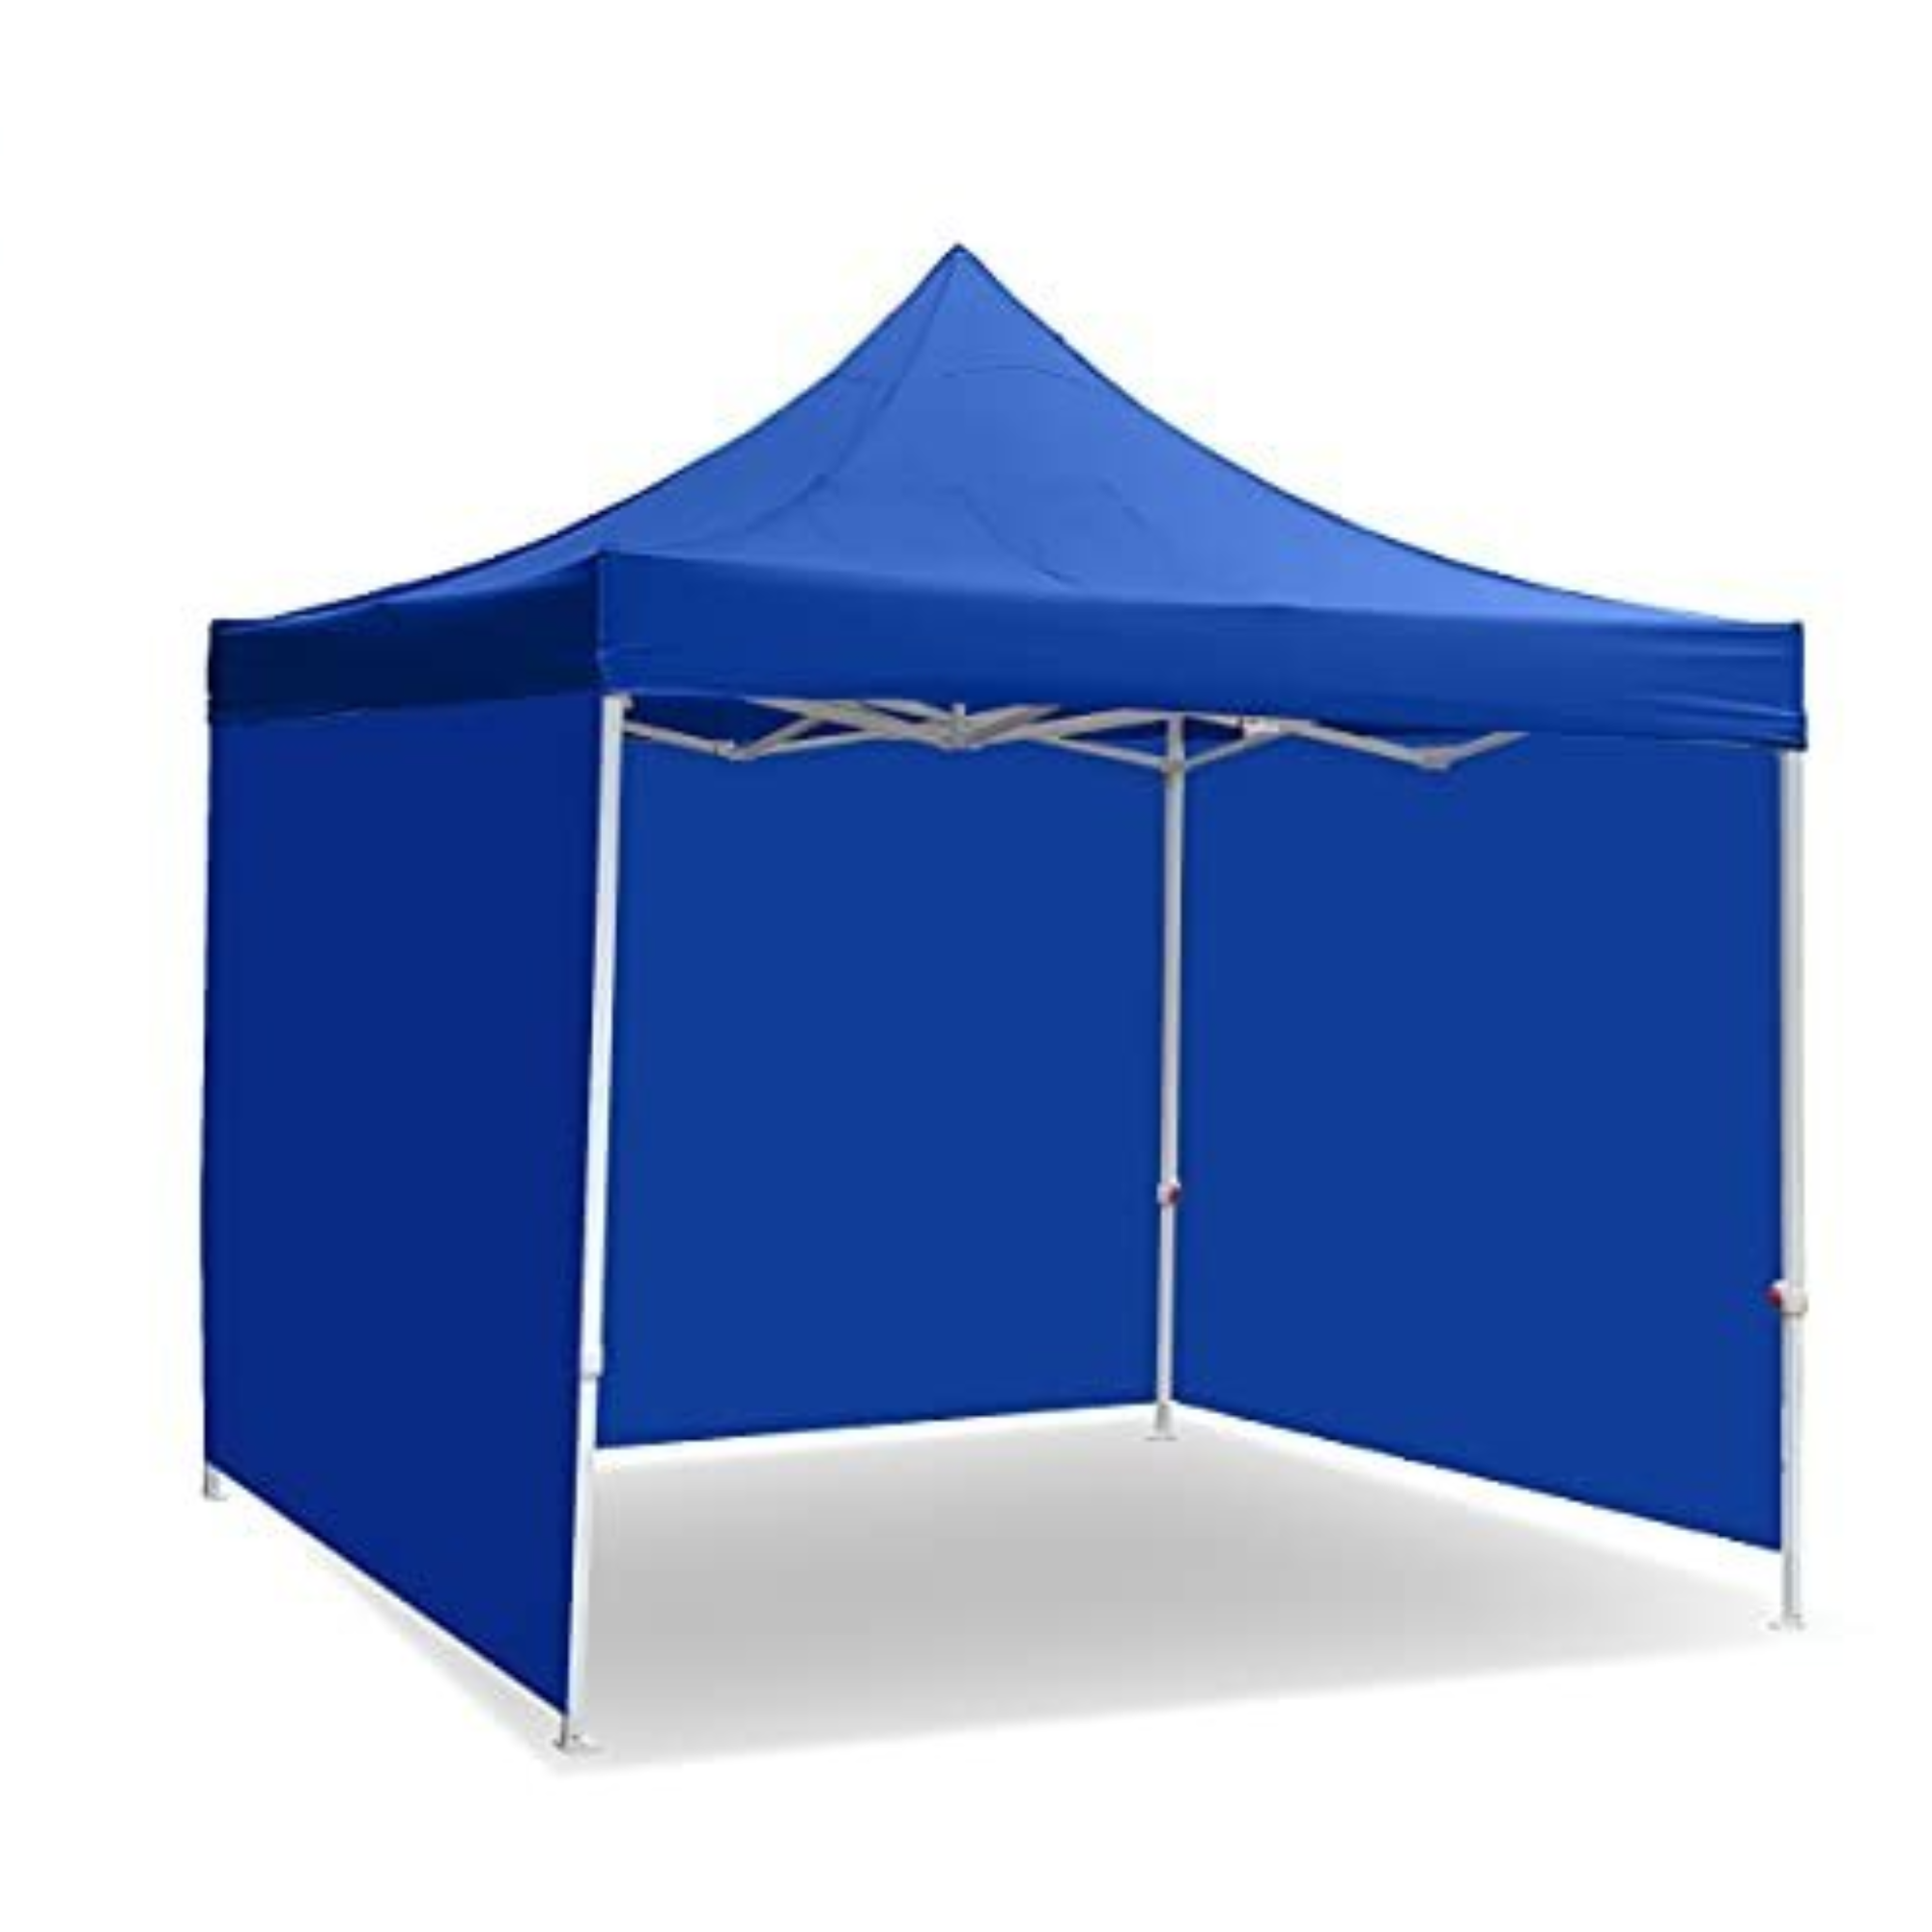 3M X 3M Folding TENTAGE CANVAS Blue With 4-SIDED Curtain